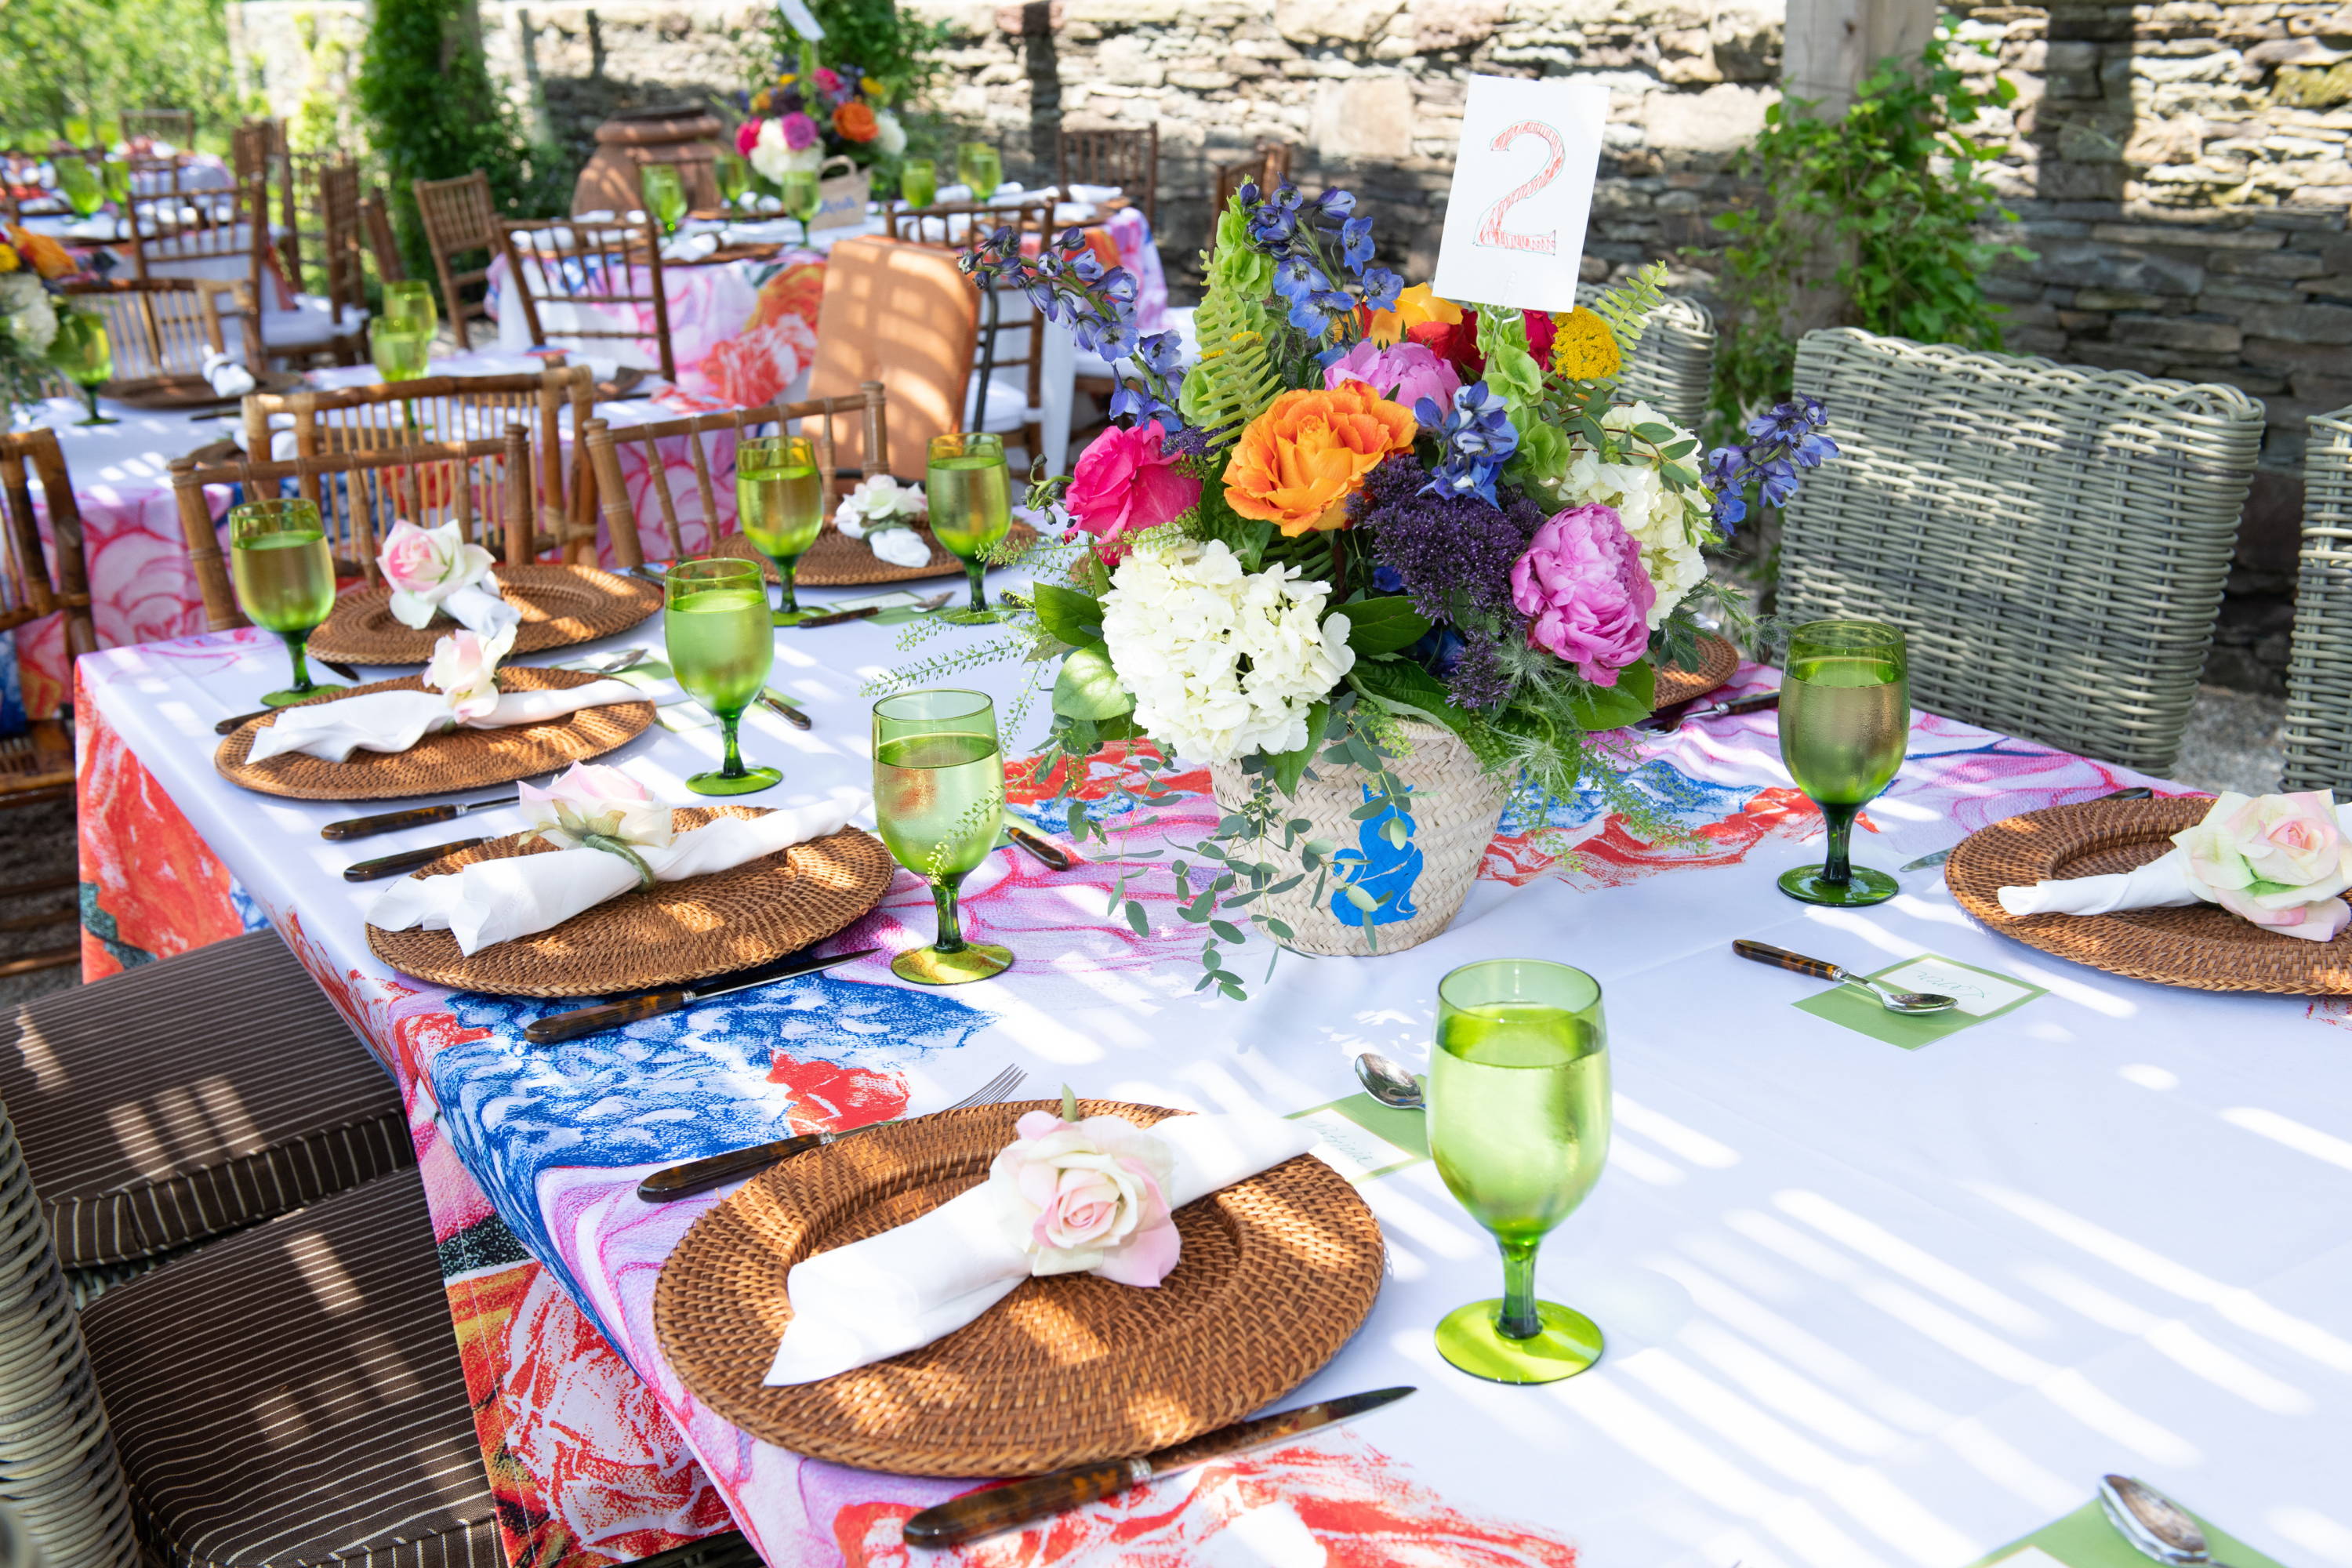 Floral table scape at a fashion show and luncheon in Newport Rhode Island by Ala von Auersperg